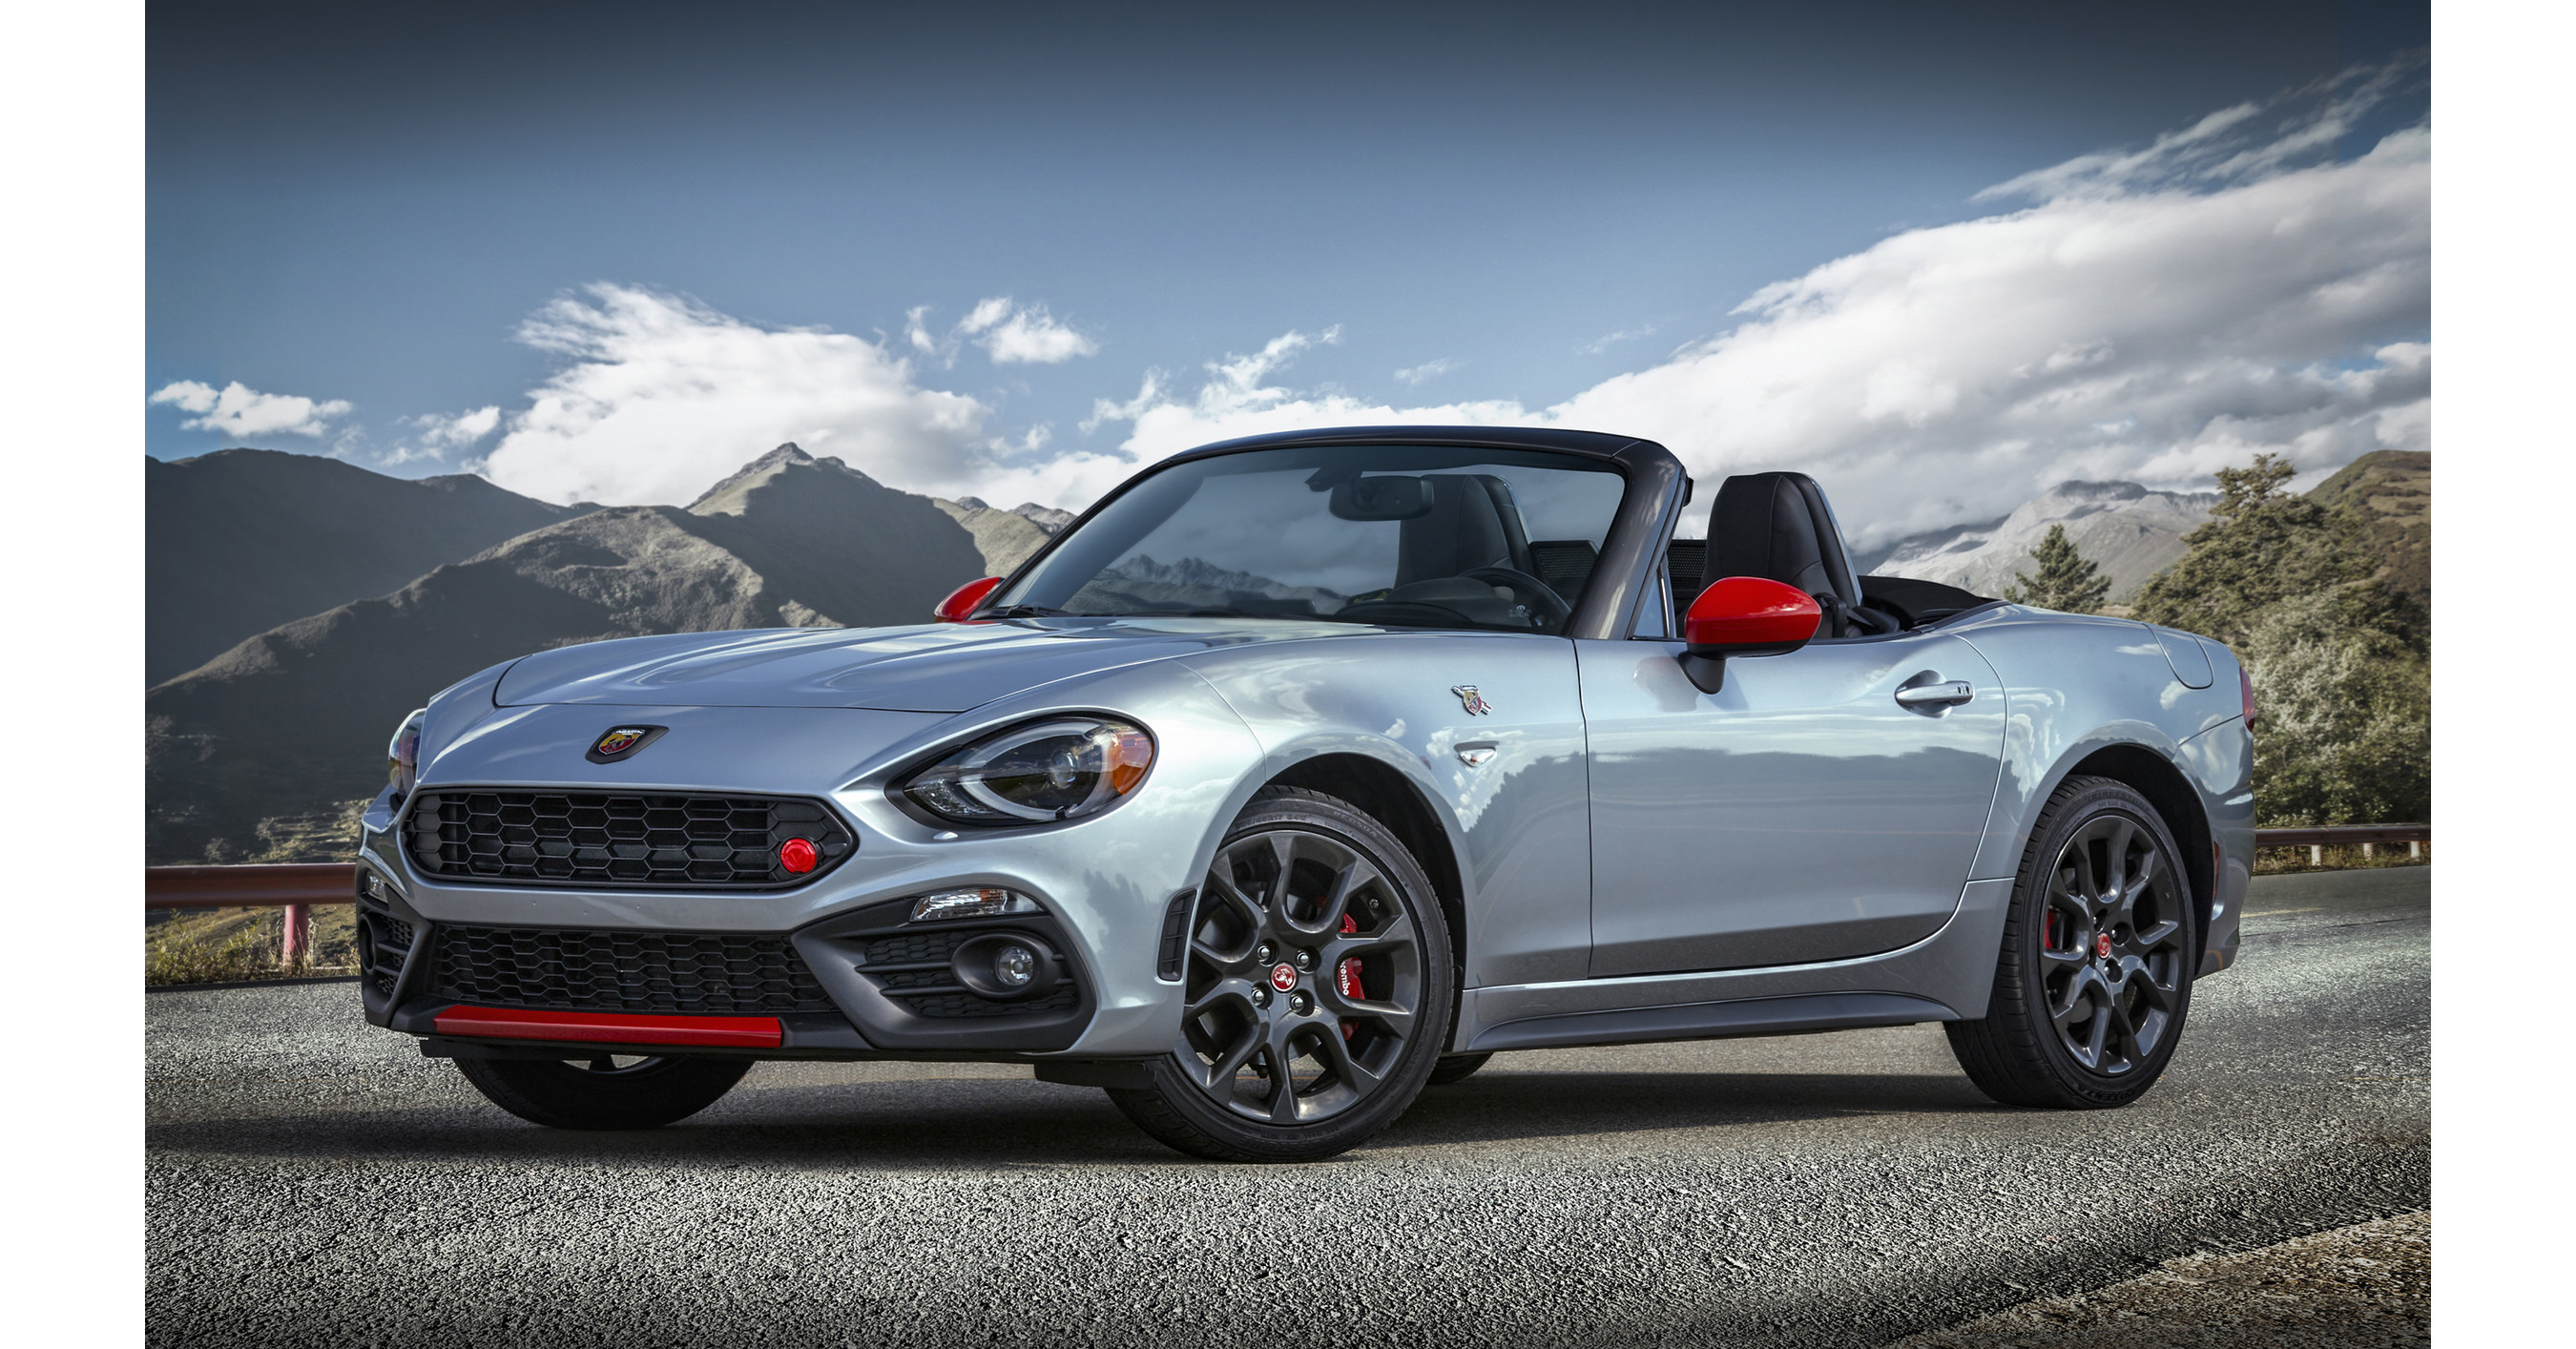 FIAT Brand Introduces New Options for 2019 124 Spider